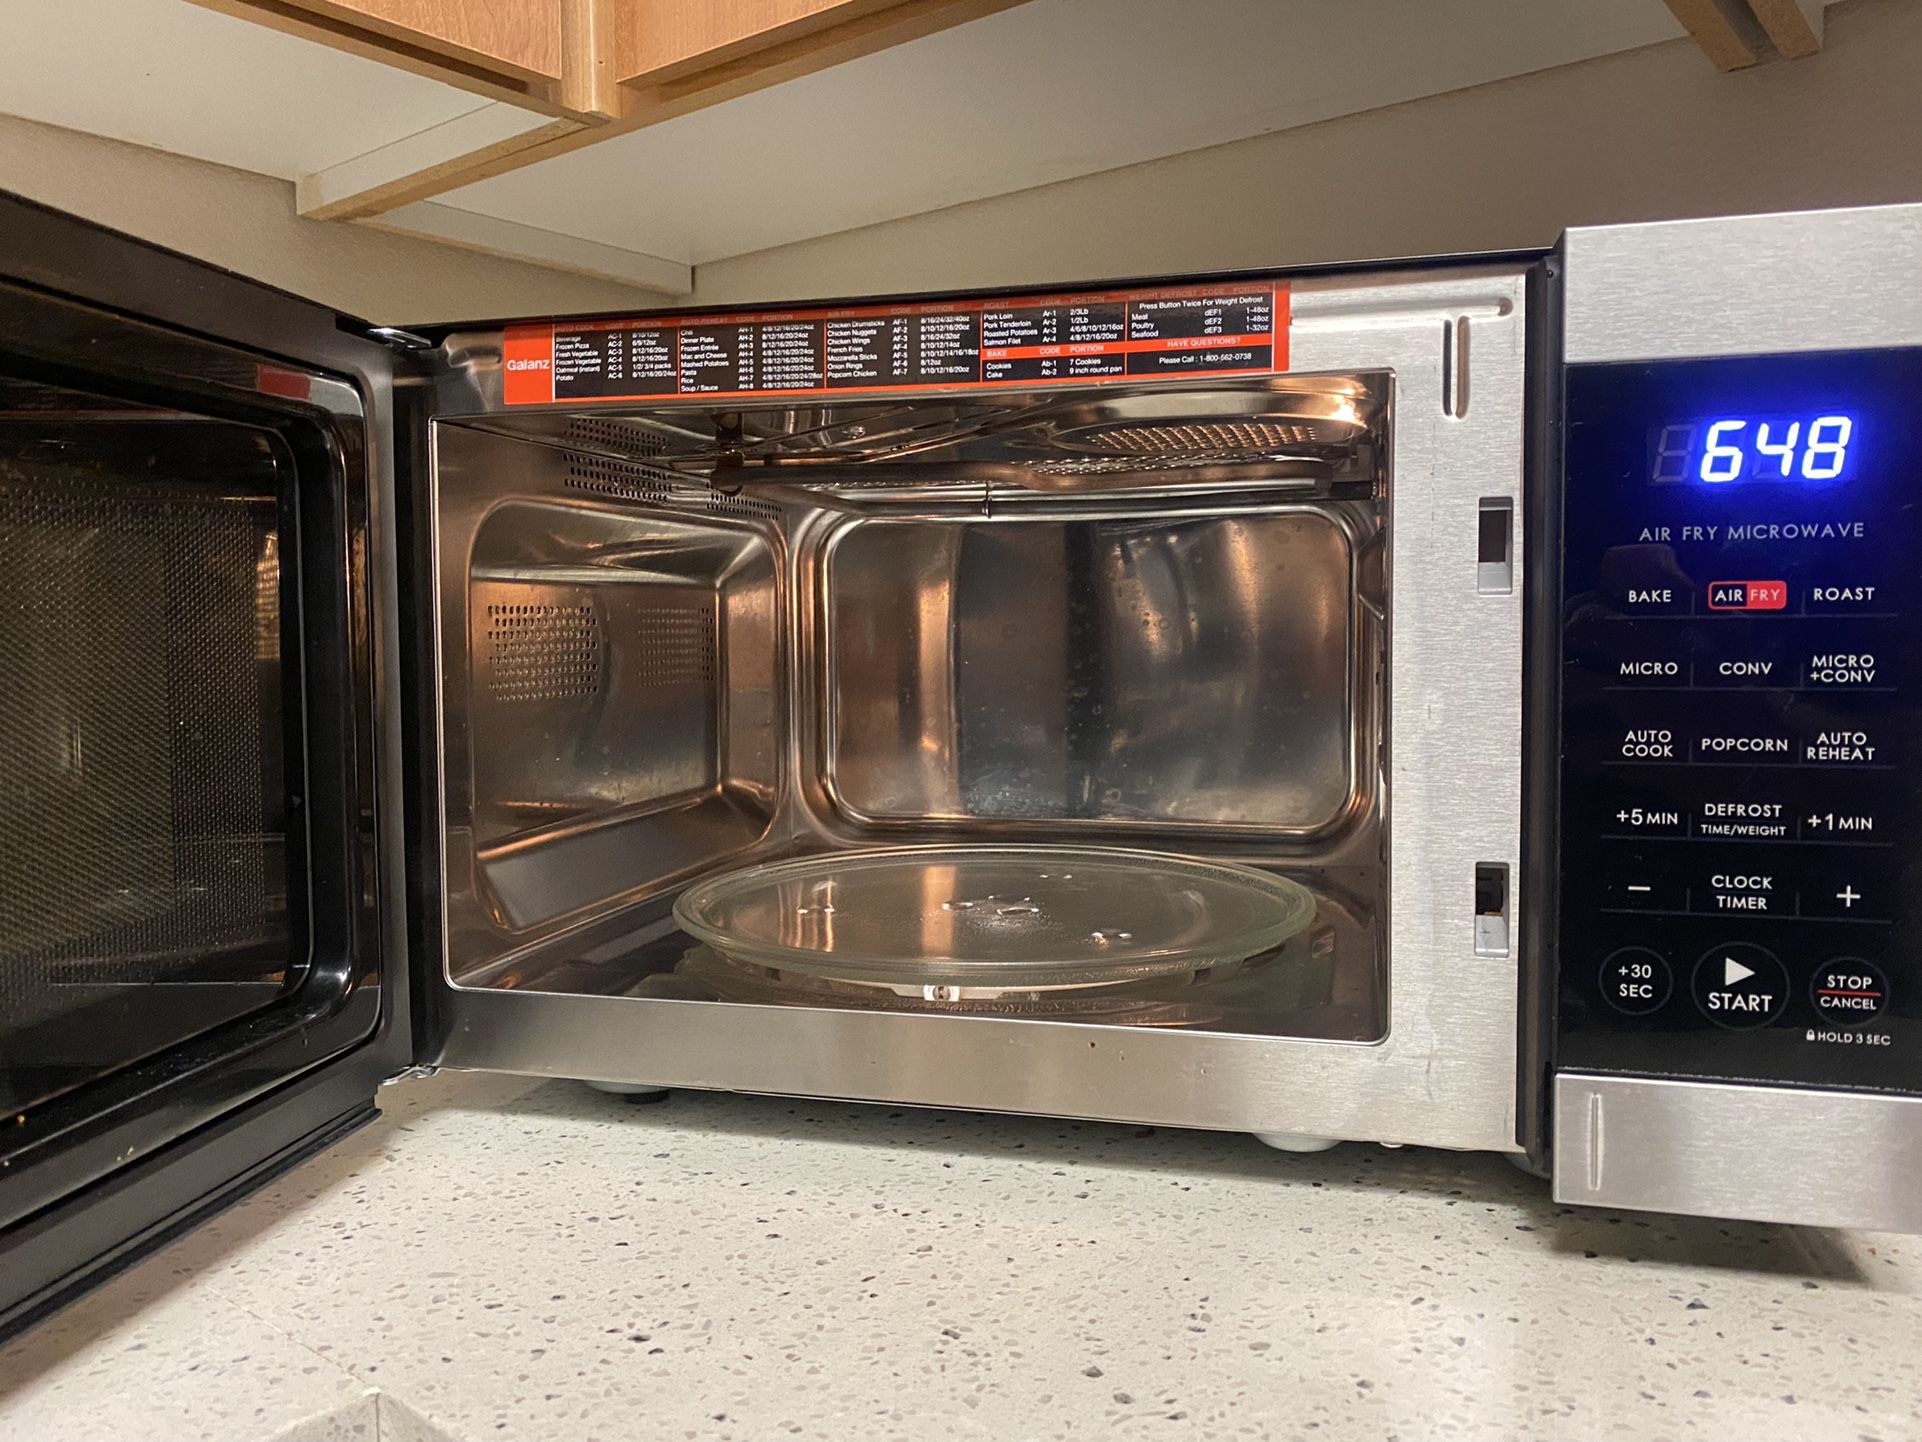 Galanz French Door Air Fryer Toaster Oven for Sale in Federal Way, WA -  OfferUp